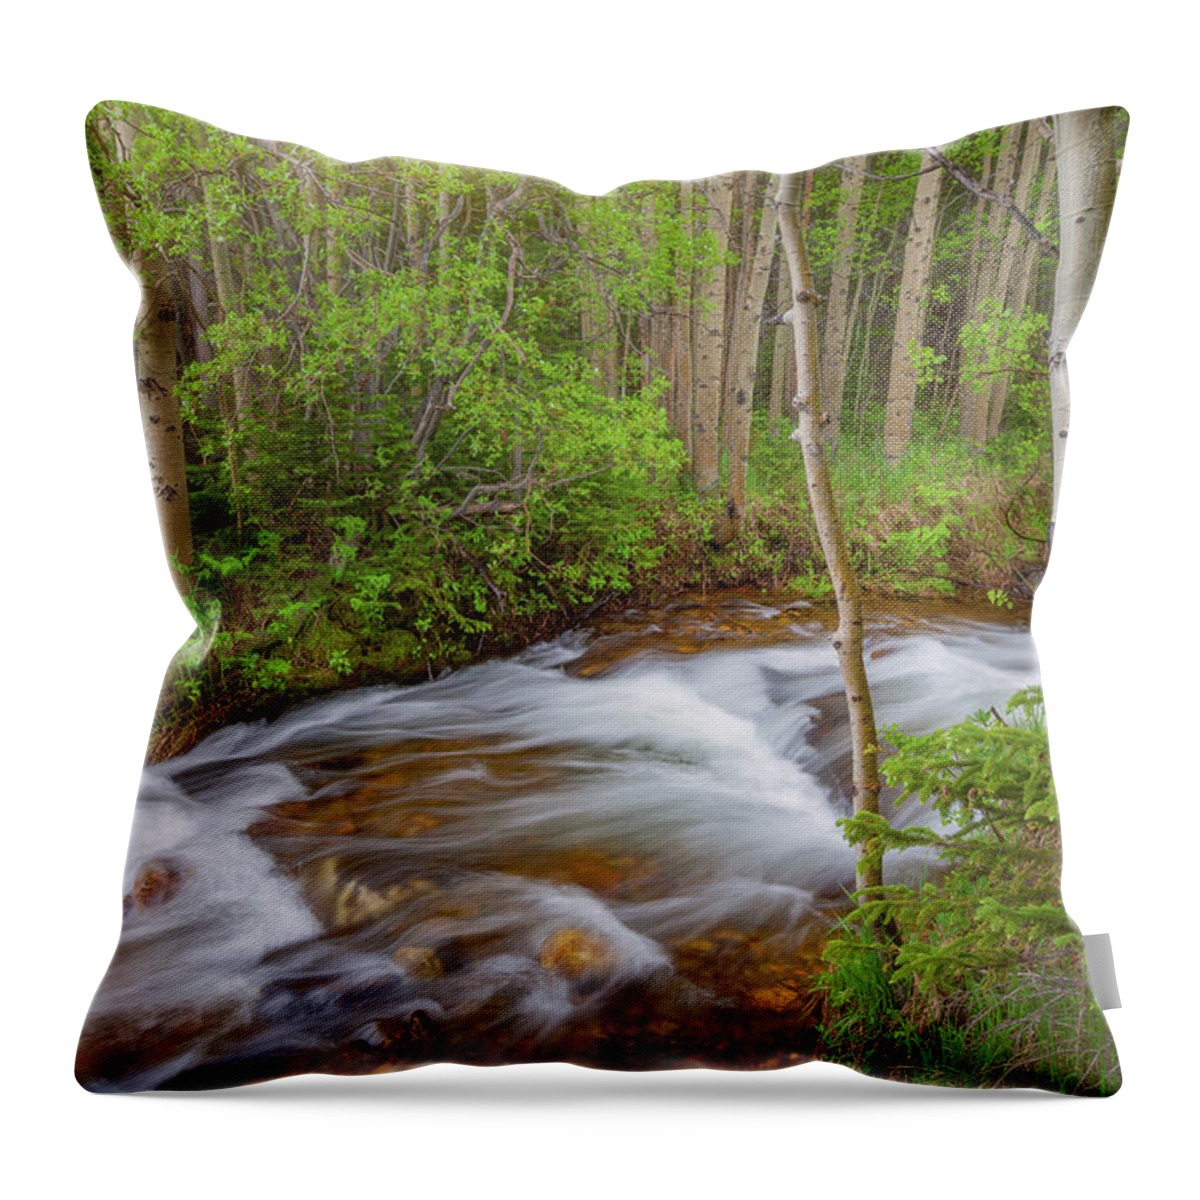 Stream Throw Pillow featuring the photograph Rocky Mountain Stream by Darren White